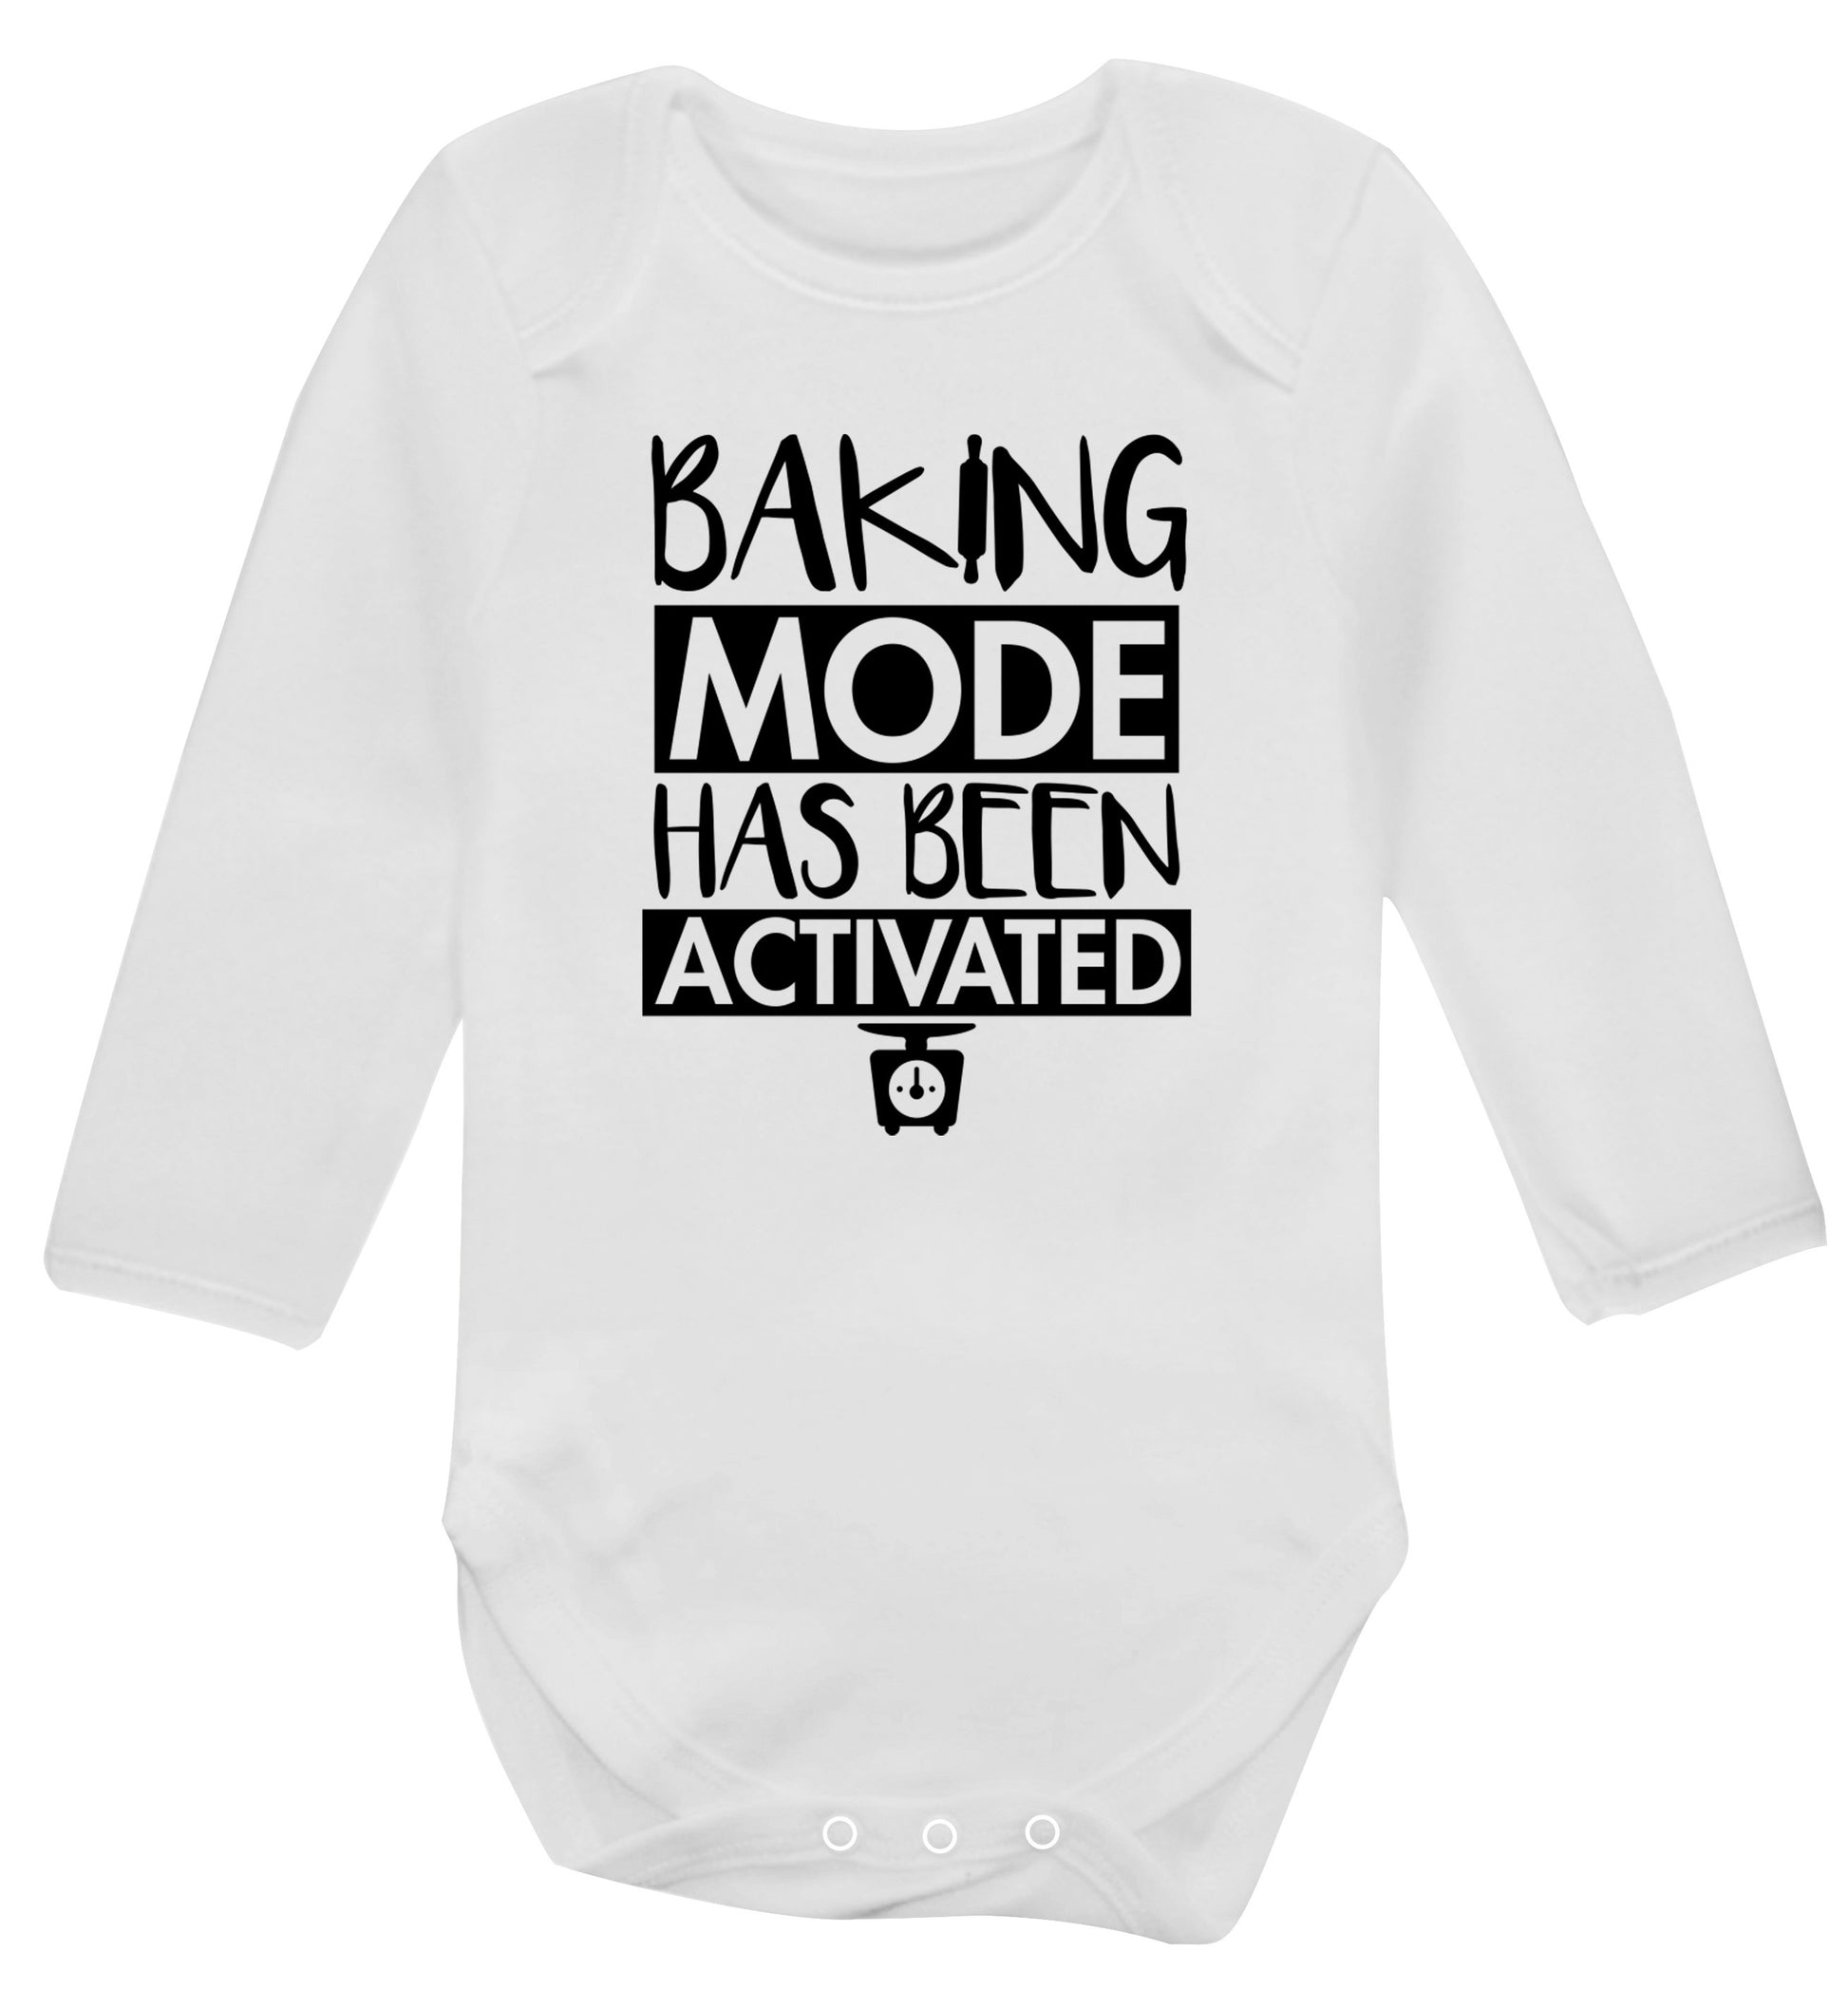 Baking mode has been activated Baby Vest long sleeved white 6-12 months